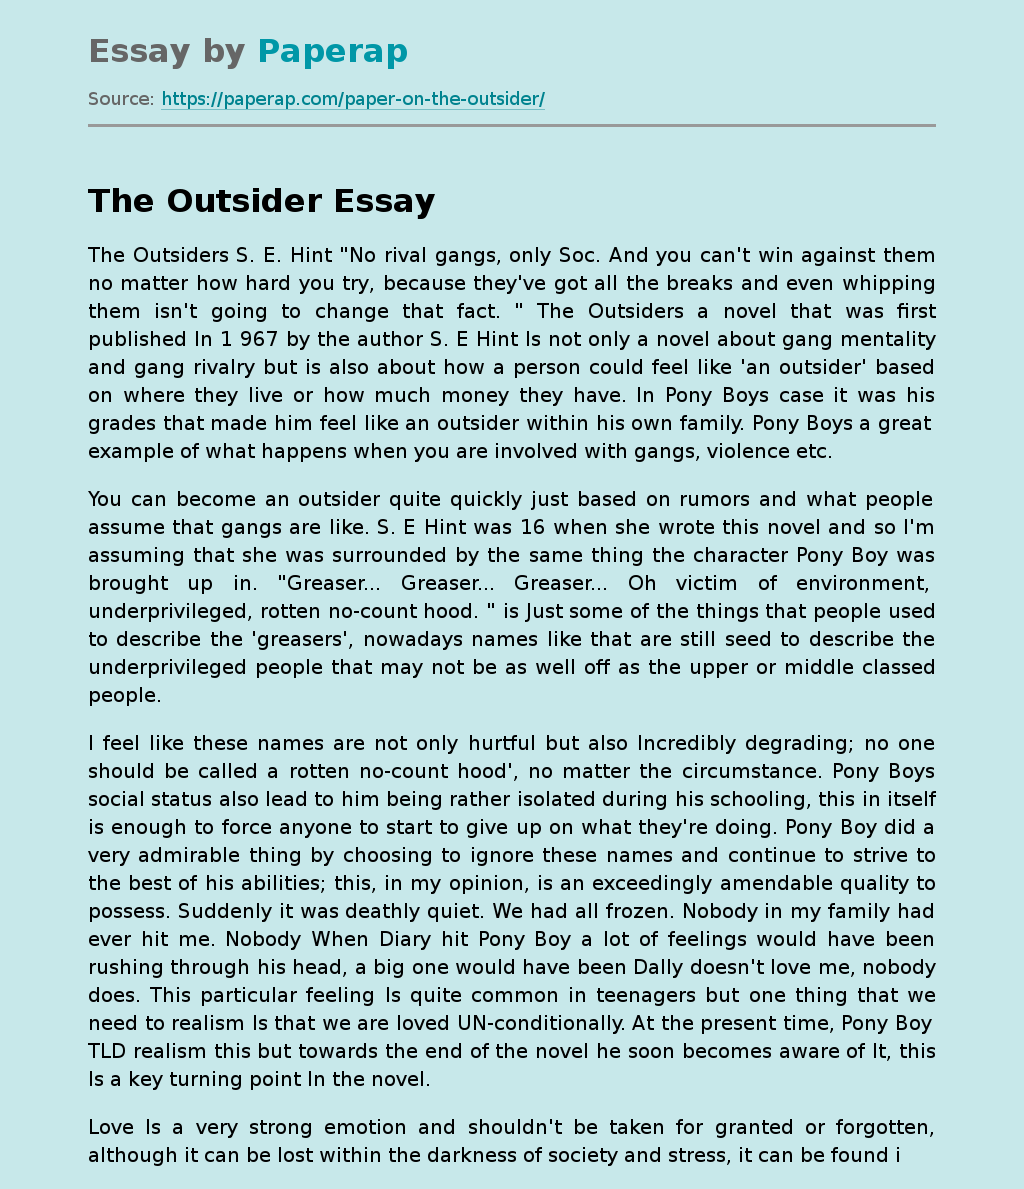 The Outsider by S.E.Hint